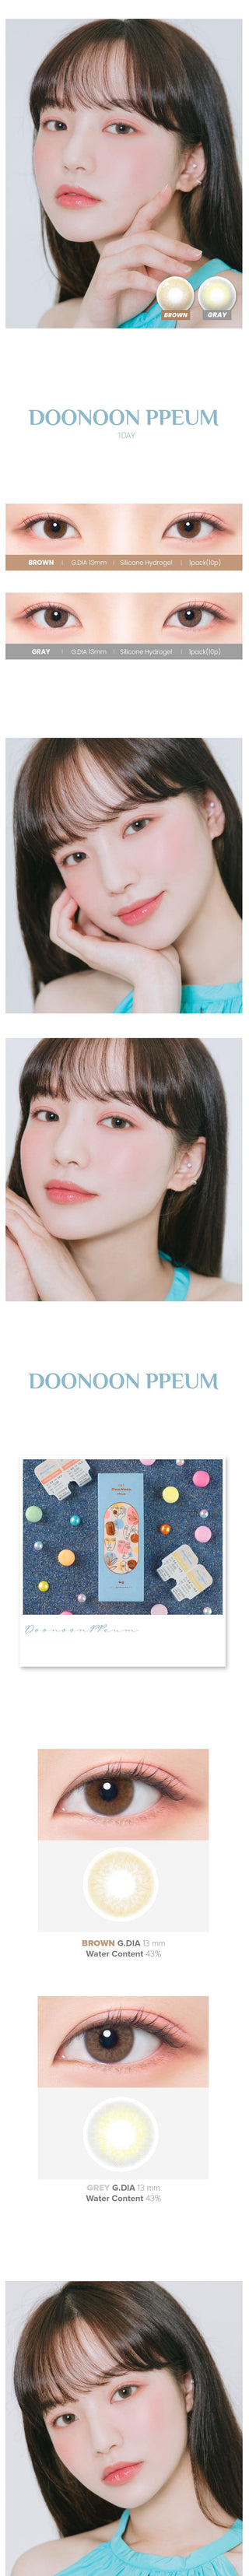 Variety of DooNoon Ppeum 1-Day Brown (10pk) contact lens colors displayed, with closeups of an eye wearing the contact lens colors, and with a model wearing the contact lens colors showing realistic eye-enlarging effect from various angles.